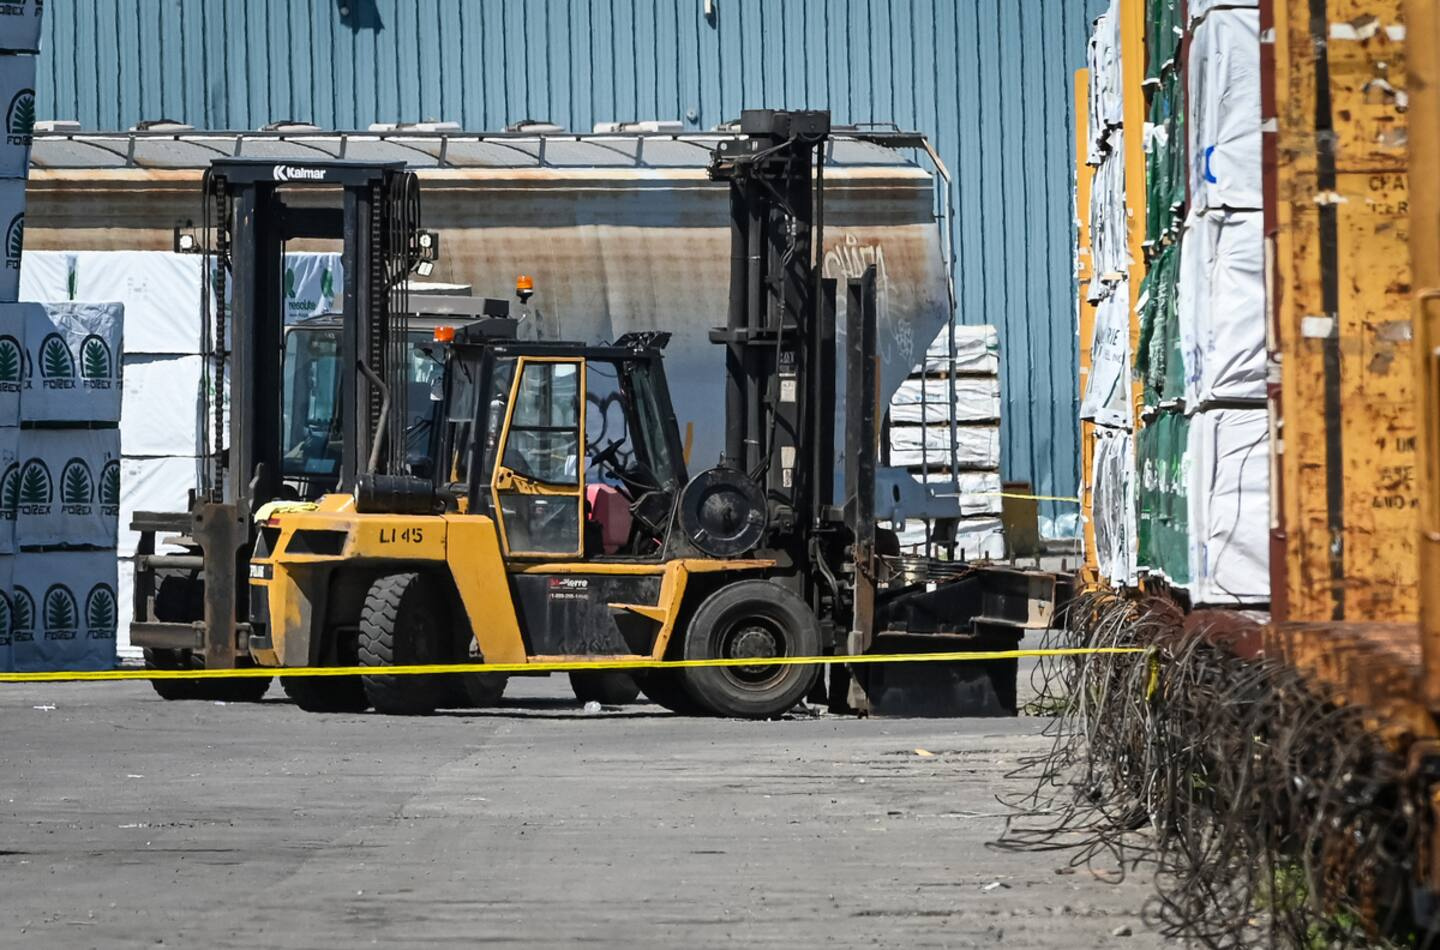 A 19-year-old worker crushed by a heavy vehicle in Beauharnois